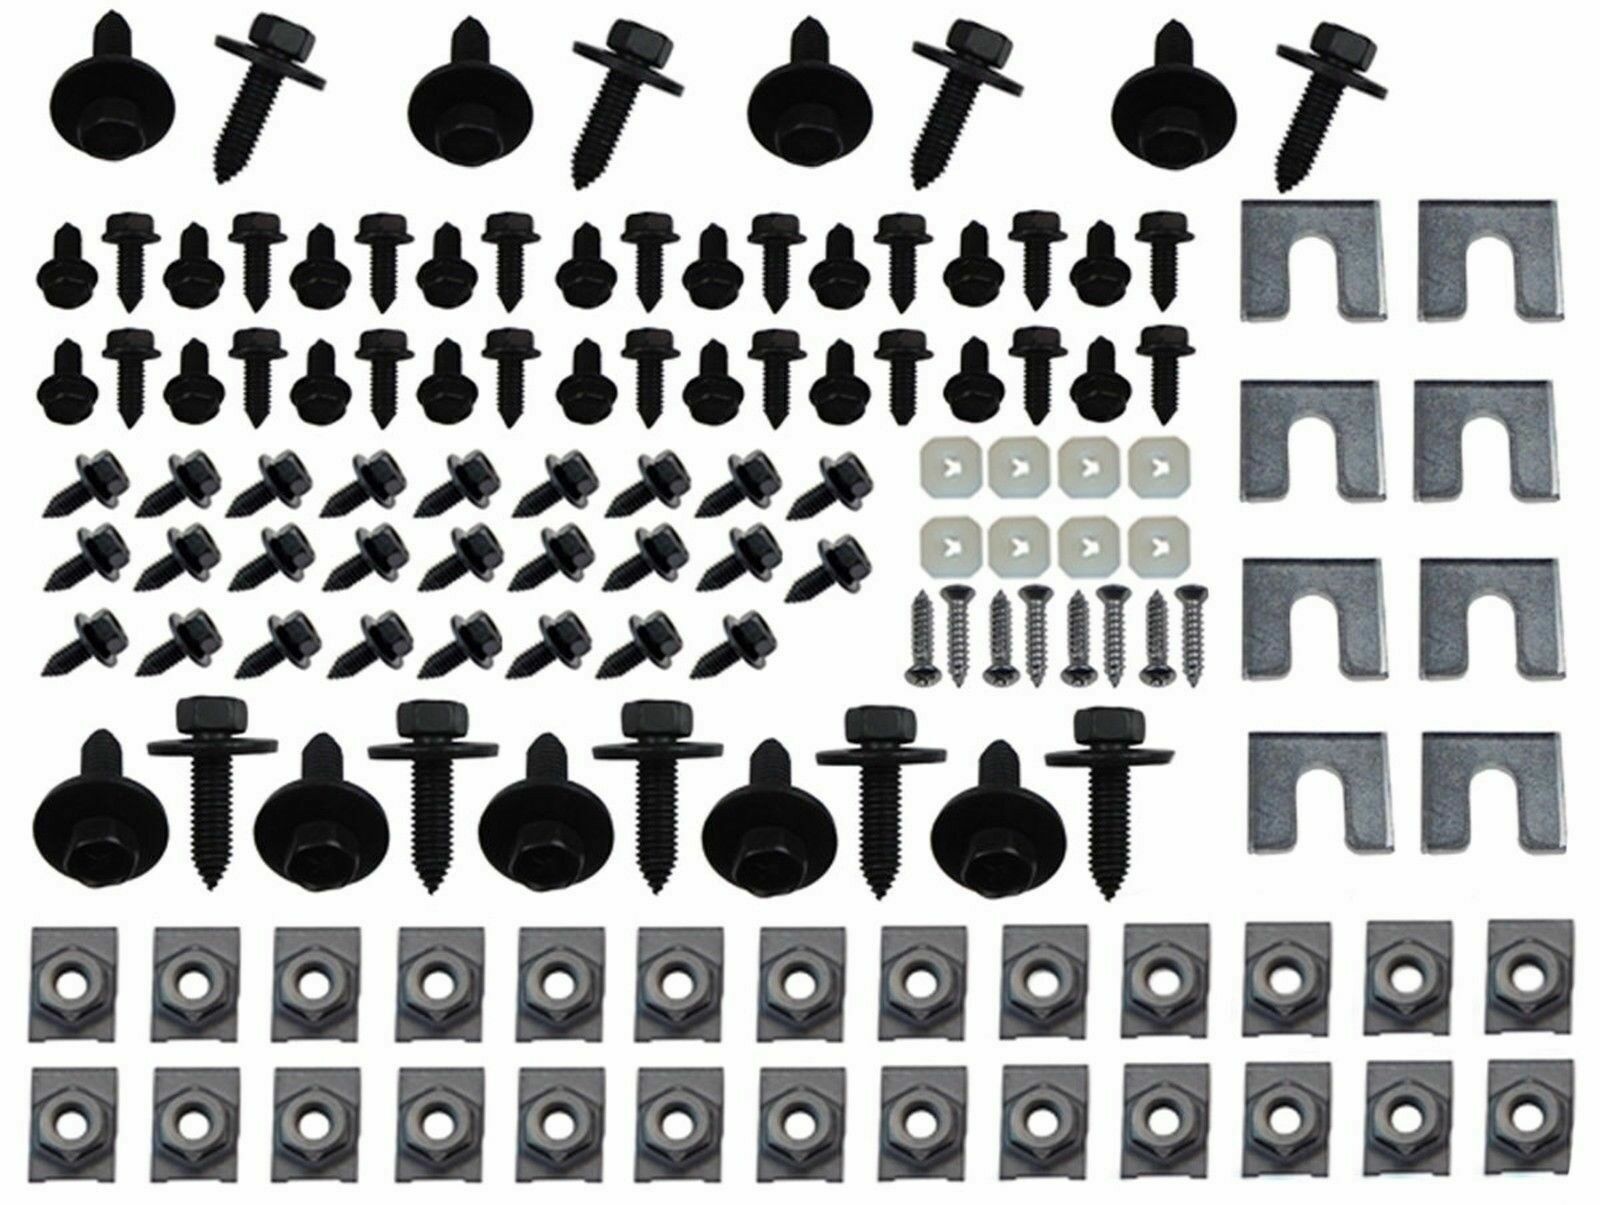 67-72 Chevy GMC Truck Front End Fastener Bolt Kit Set Correct Head Markings